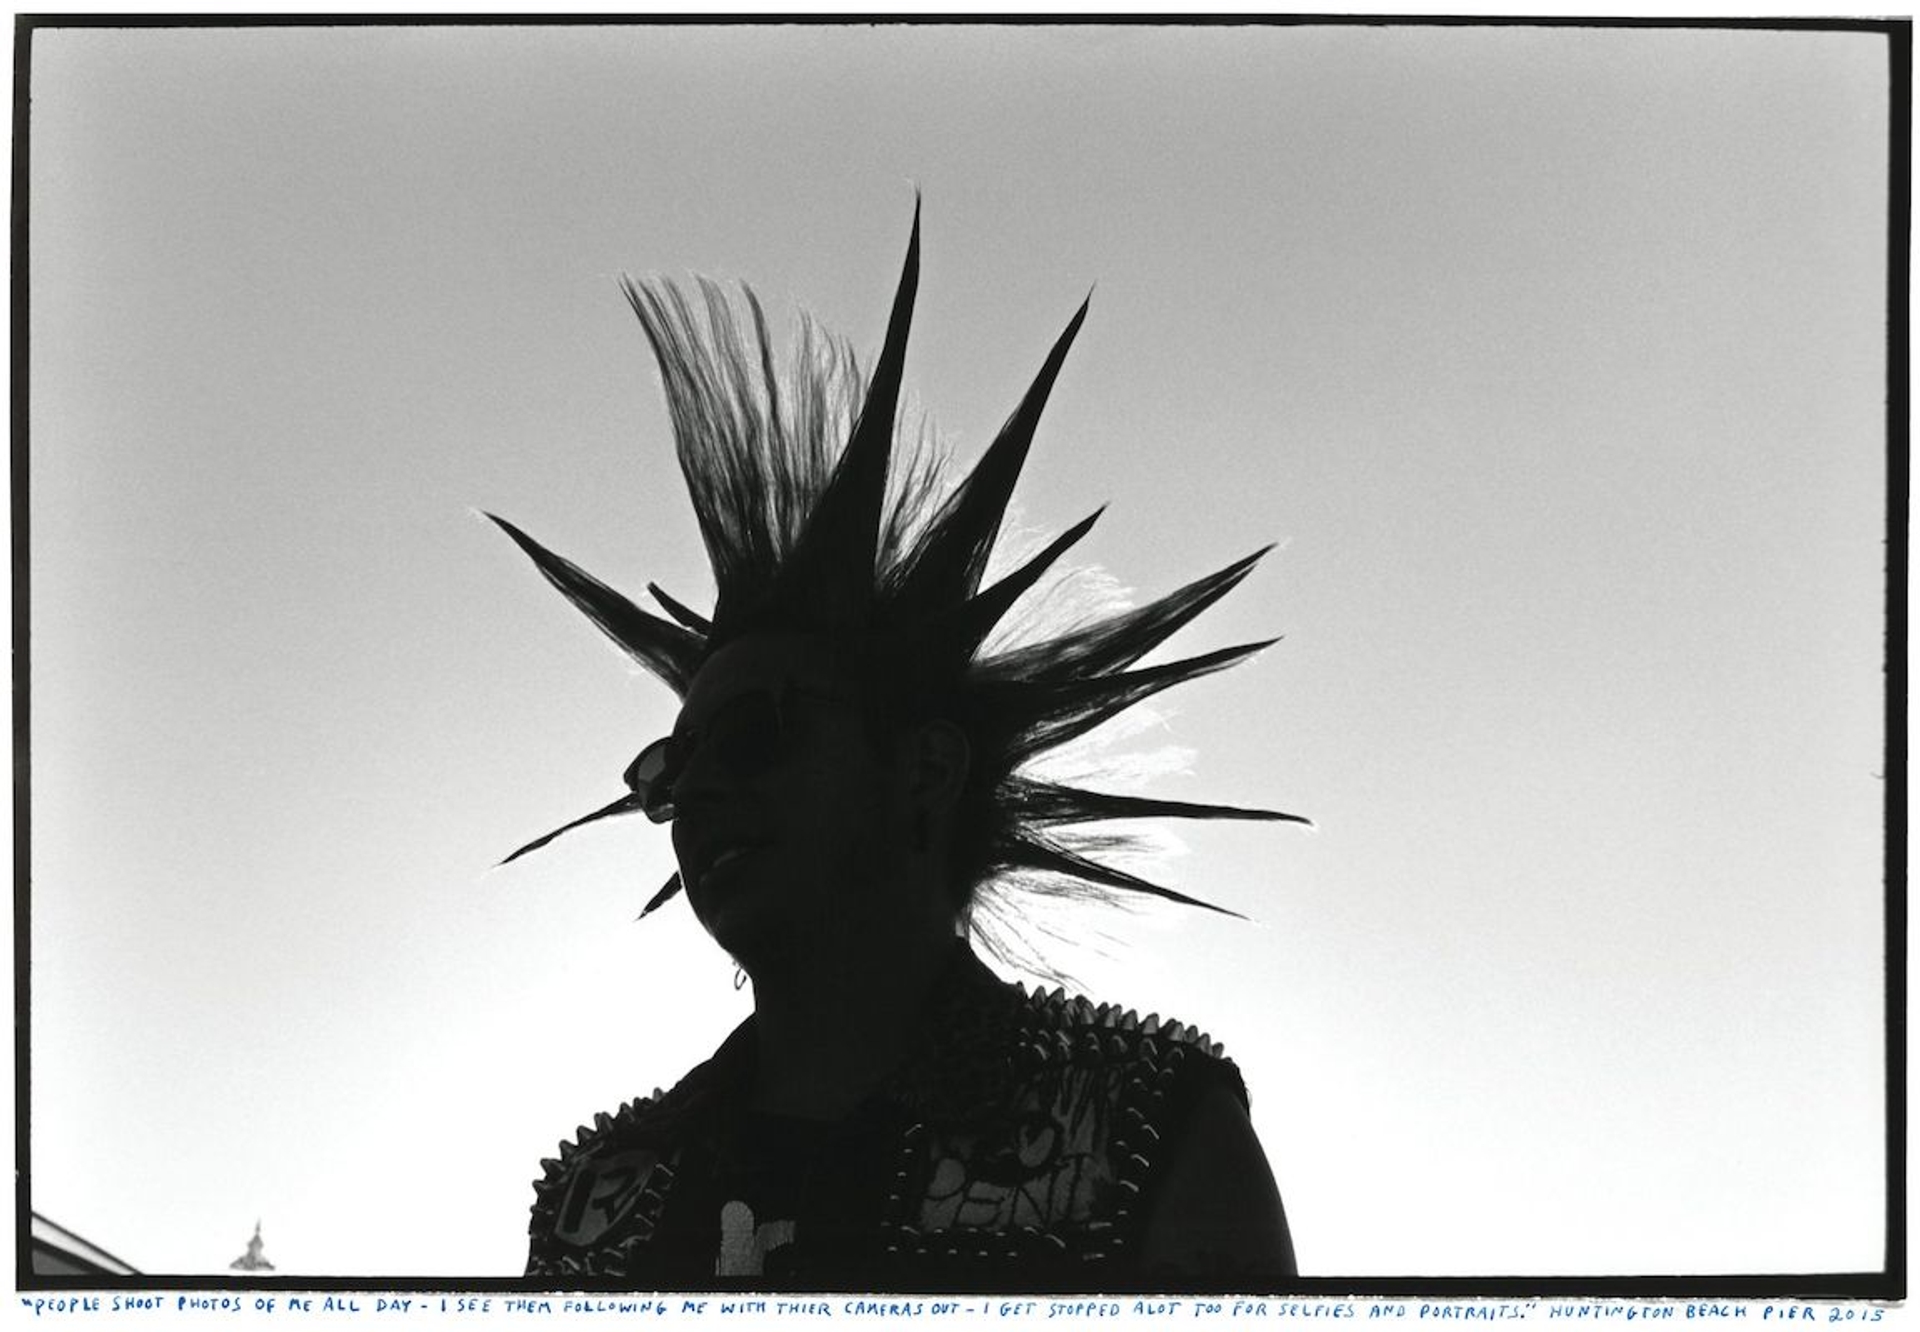 Ed Templeton, Hawk and Spikes Silhouette, HB, 2015. Courtesy of the artist and Roberts Projects, Los Angeles.